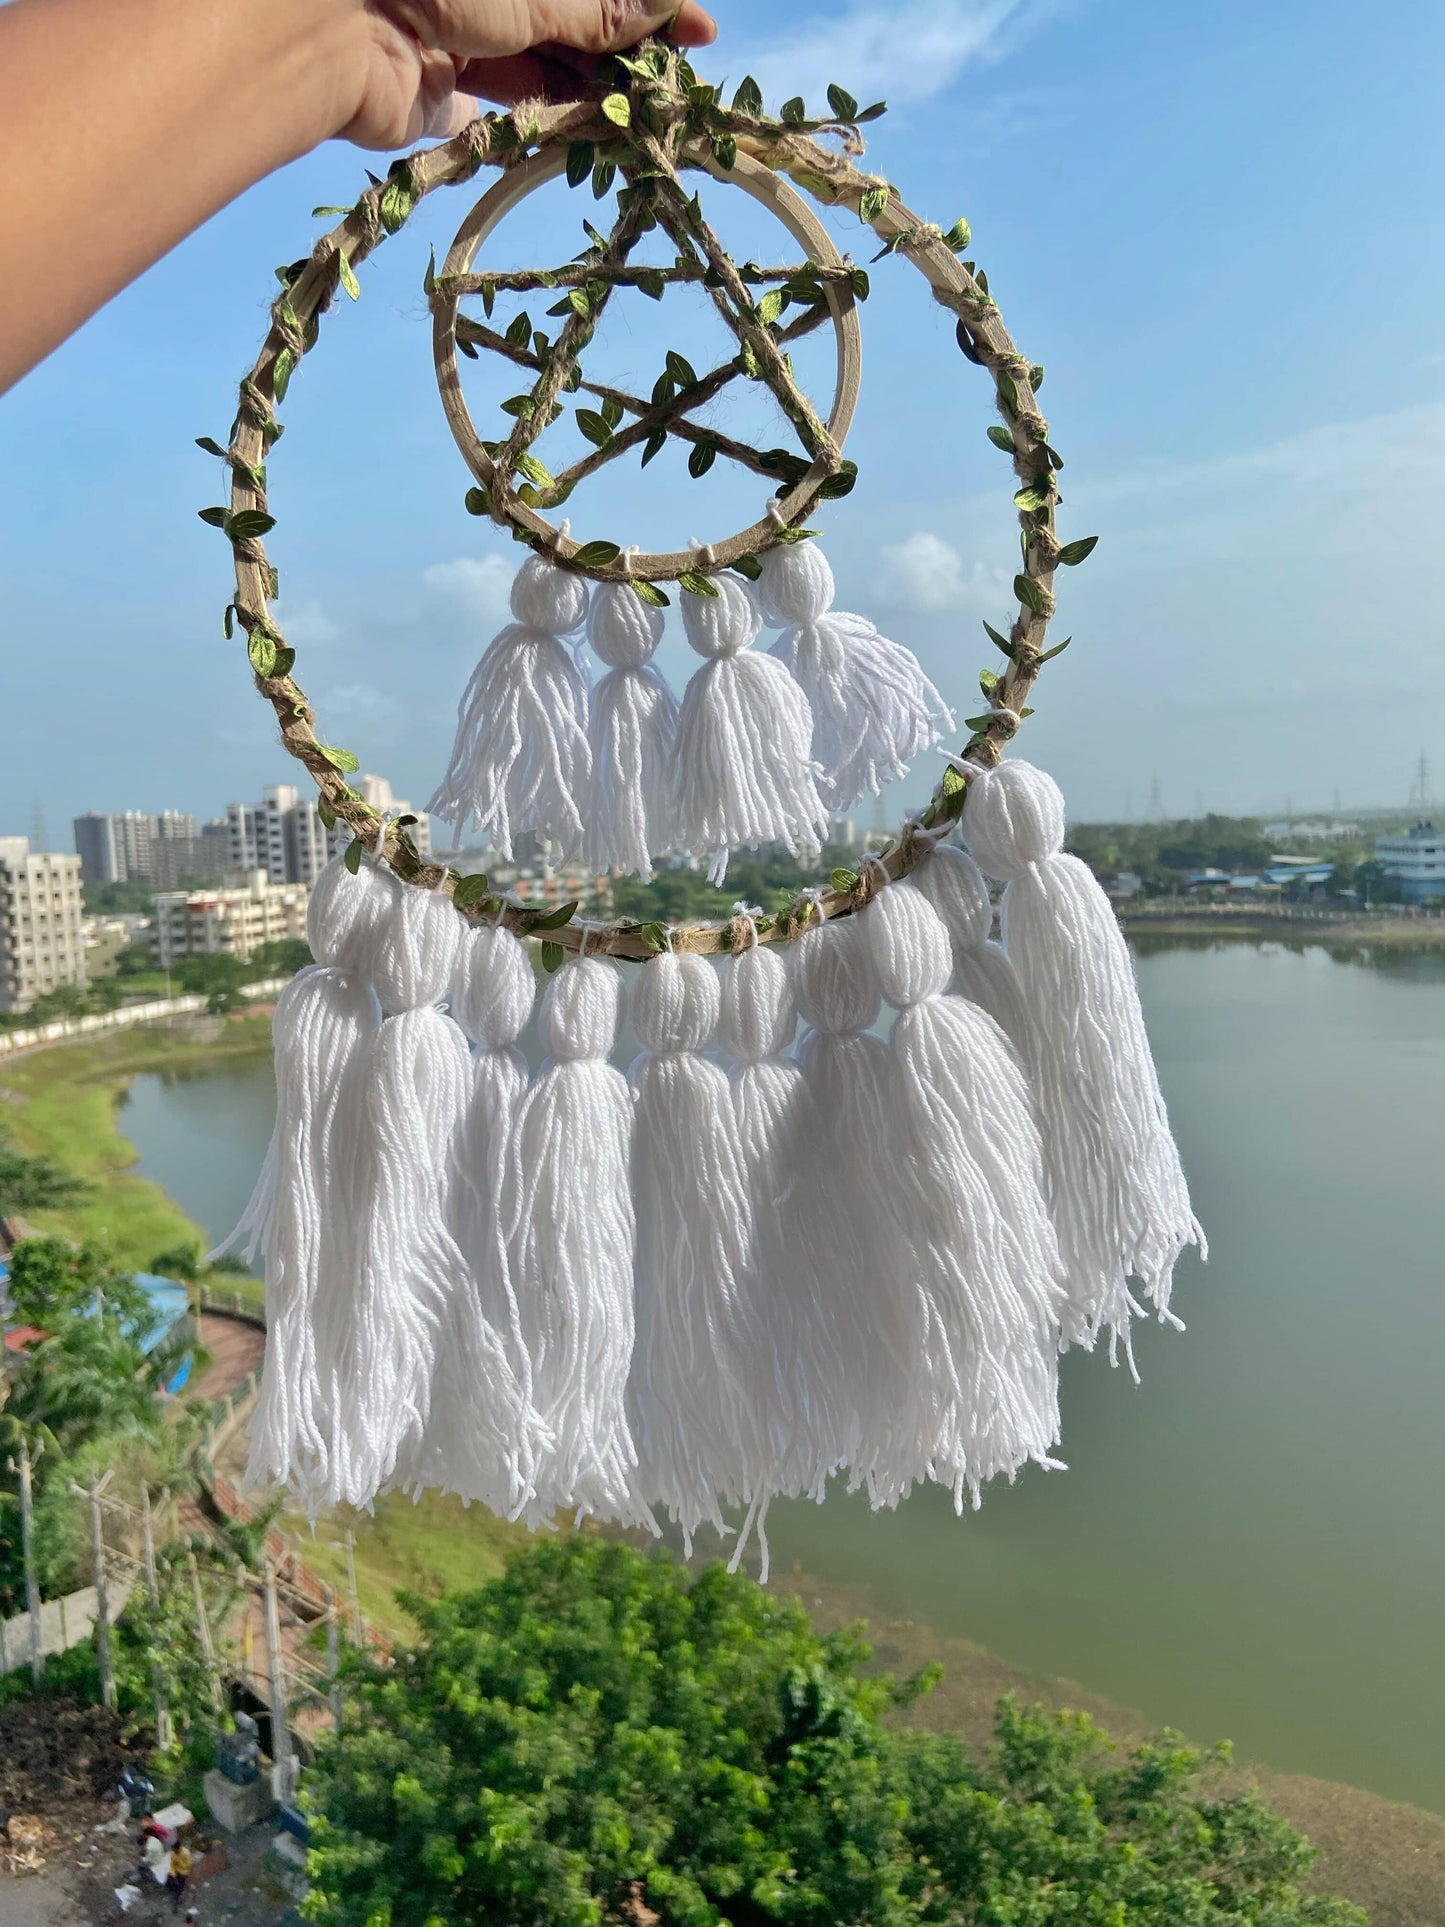 Wall hanging Dreamcatcher with Pentacle Symbol